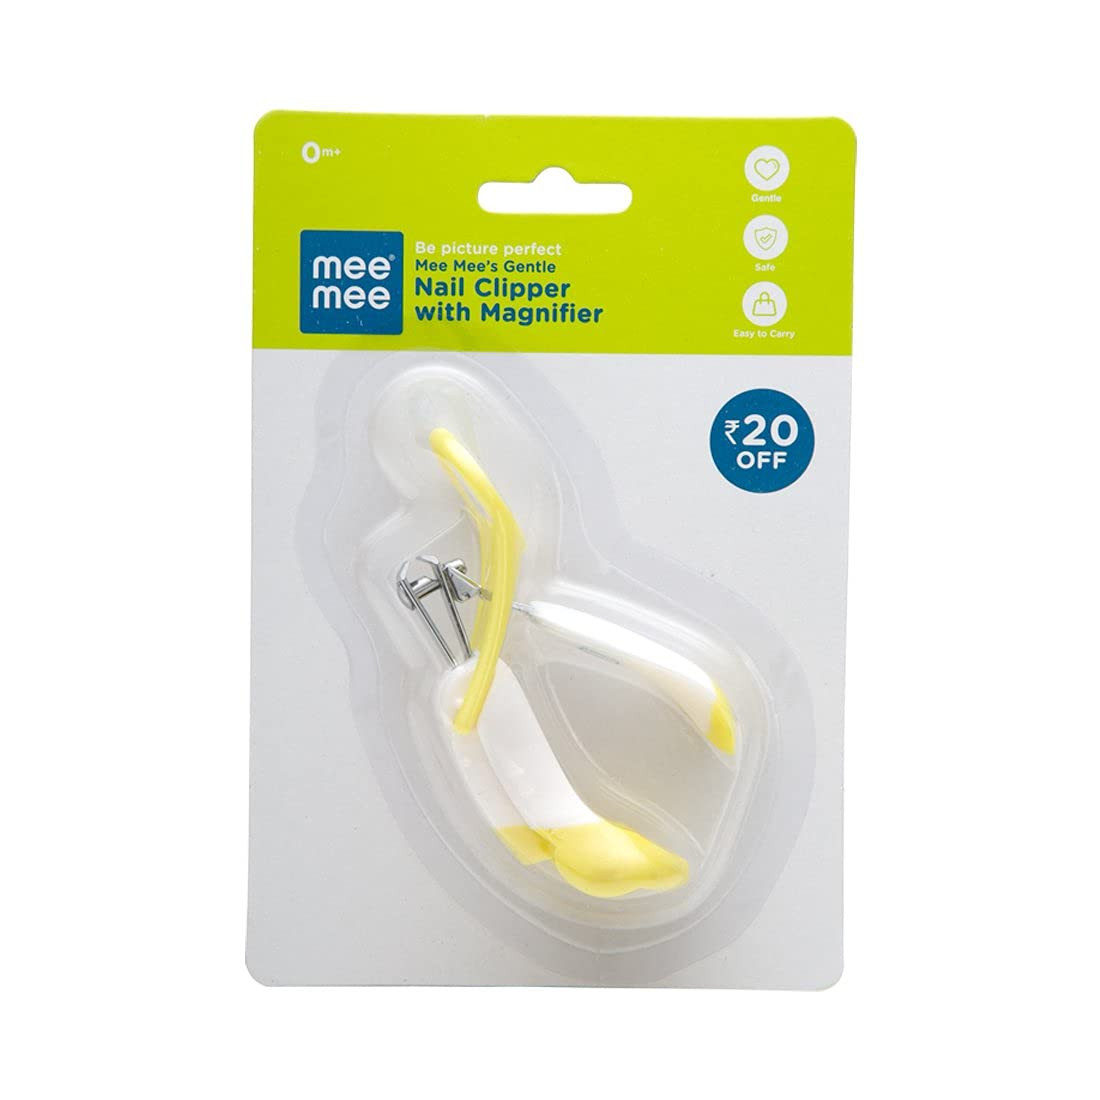 Mee Mee Gentle Nail Clipper with Magnifier (White/Yellow)